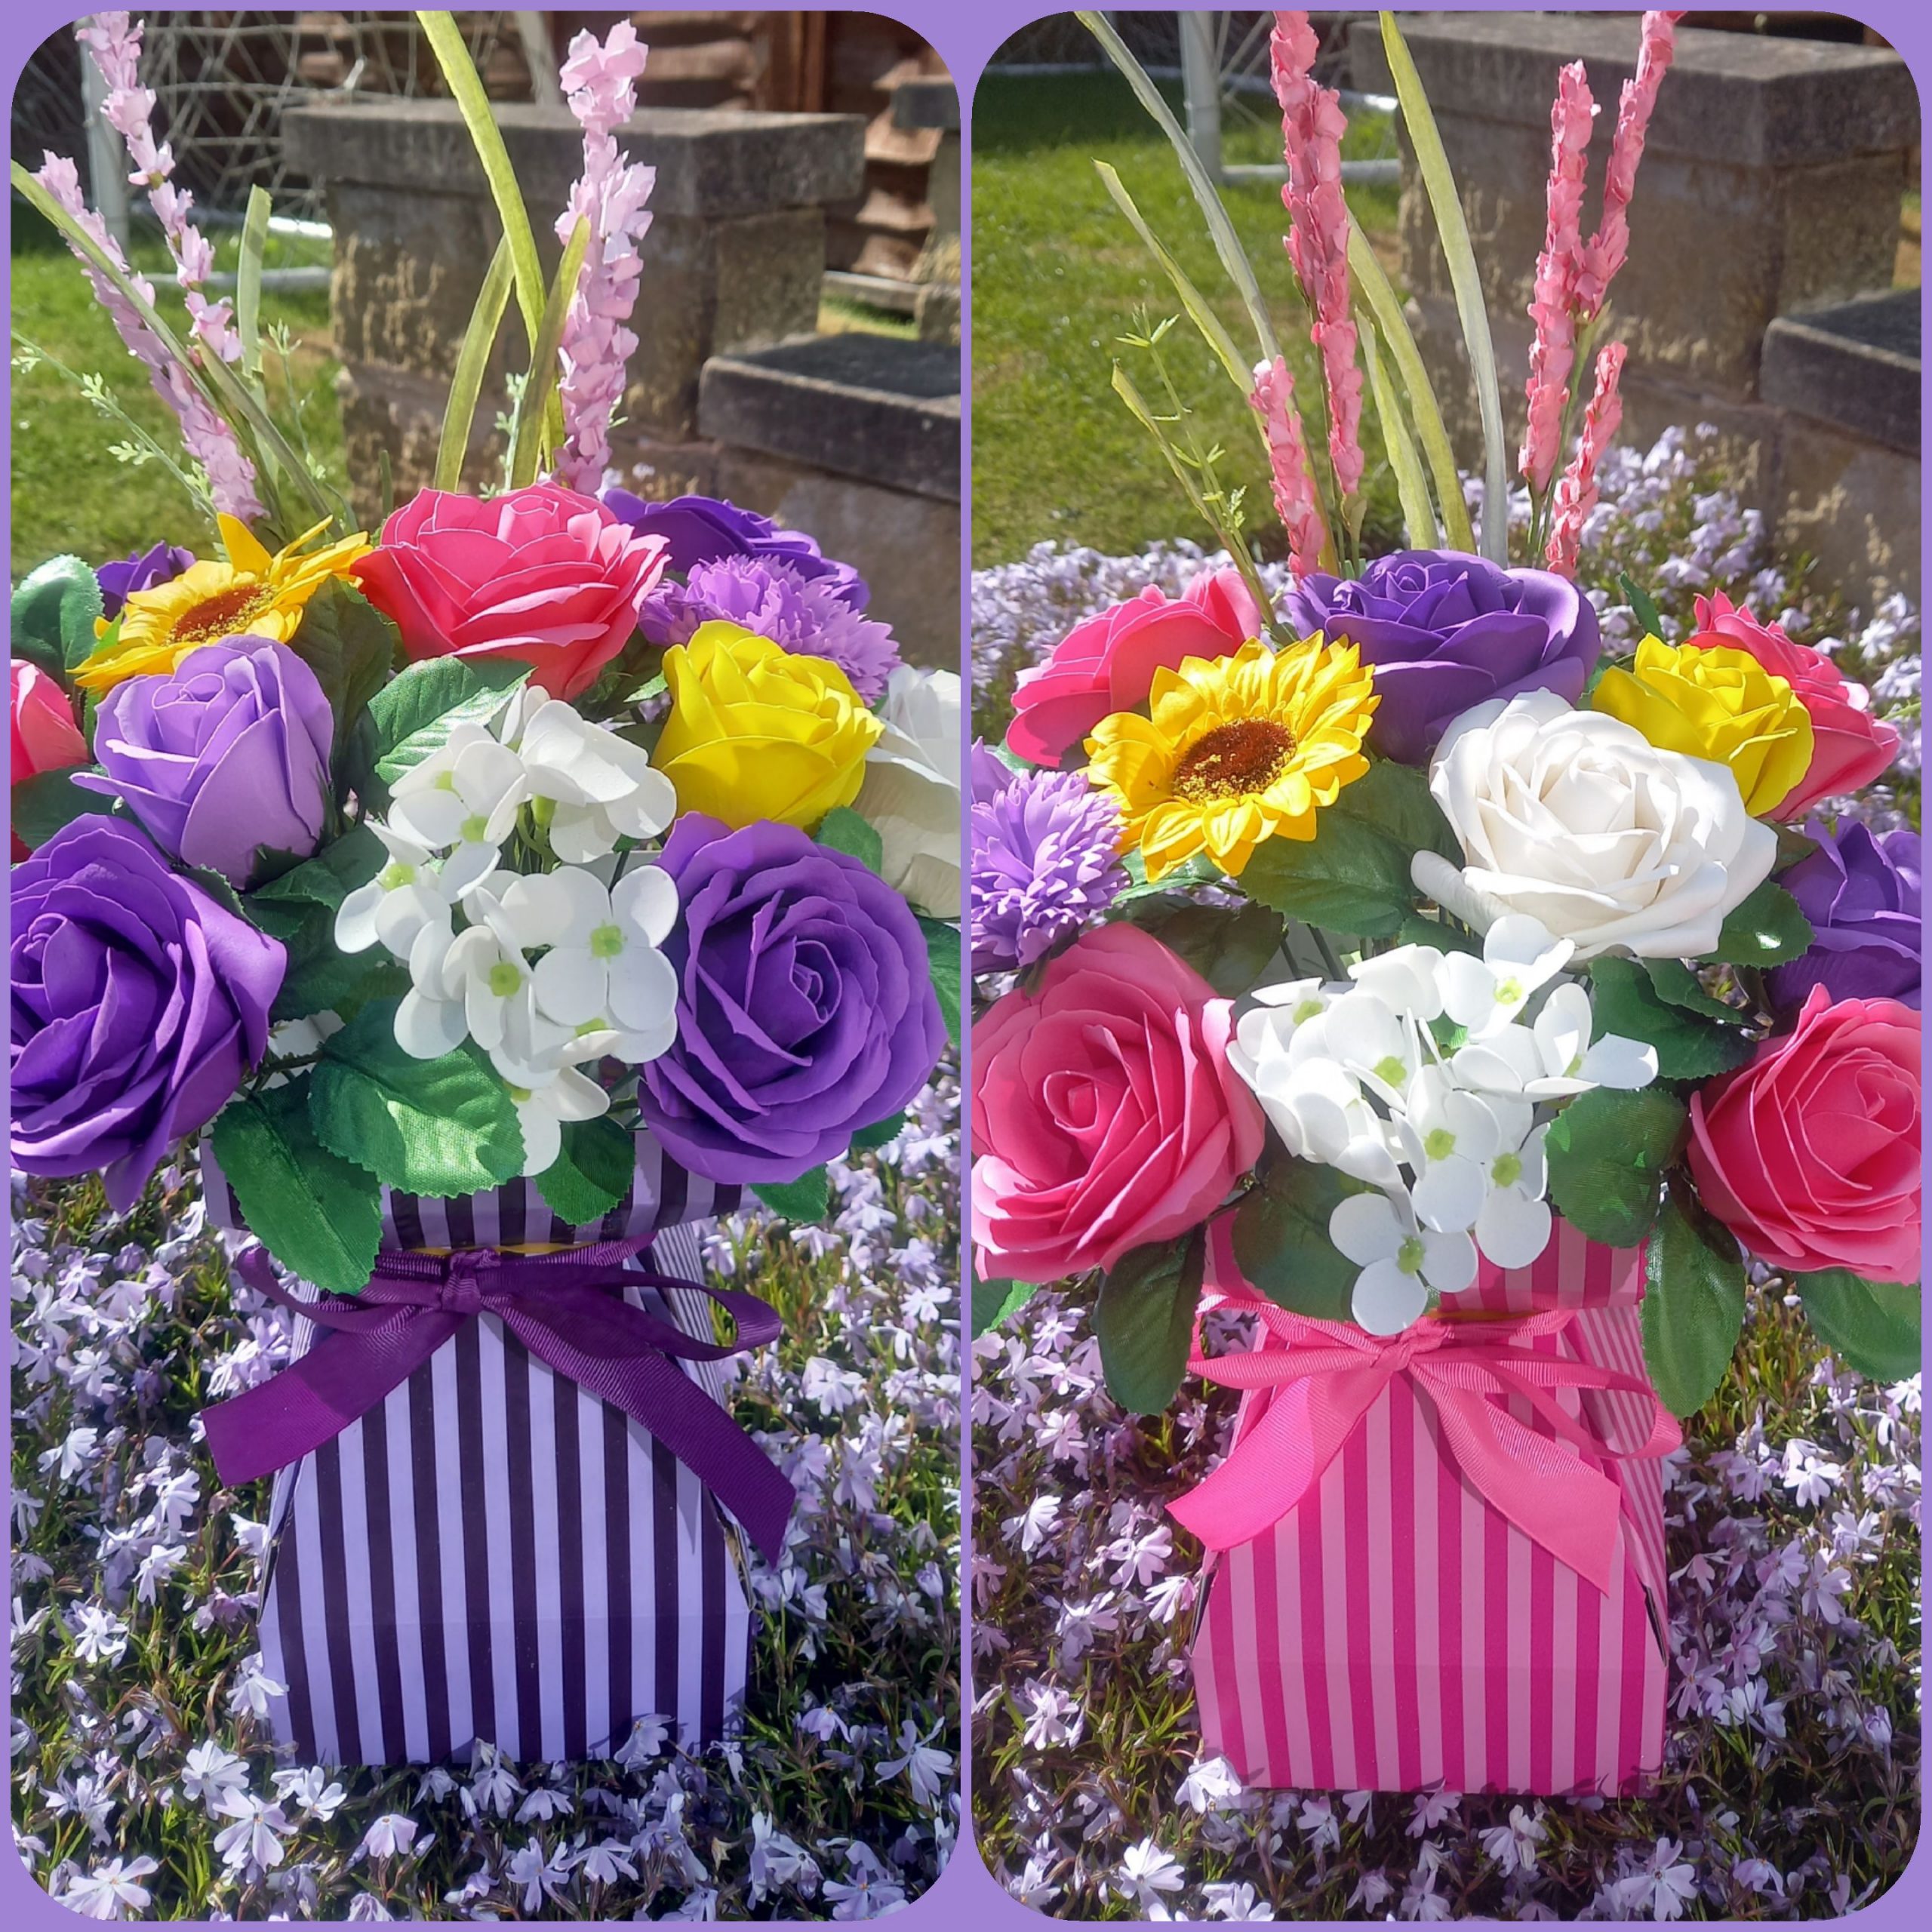 Sunflower brights in purple and pink transportervases